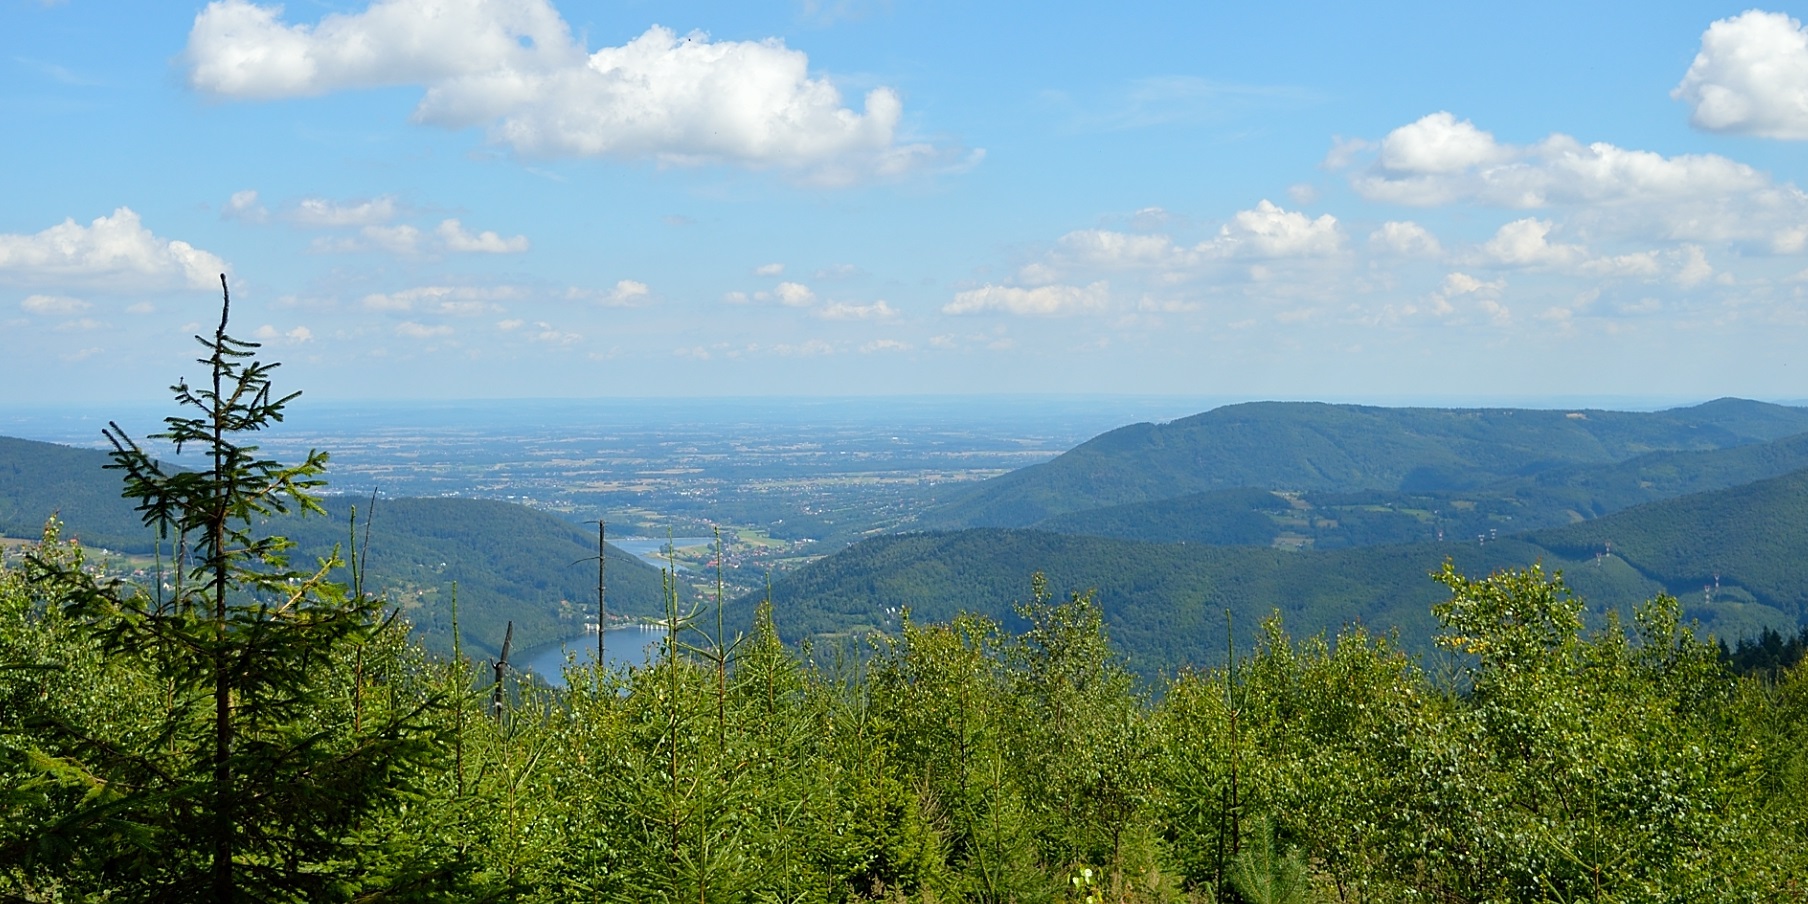 Why to climb the “Crown of Polish Mountains”? On our way to Czupel – the highest peak in Little Beskids